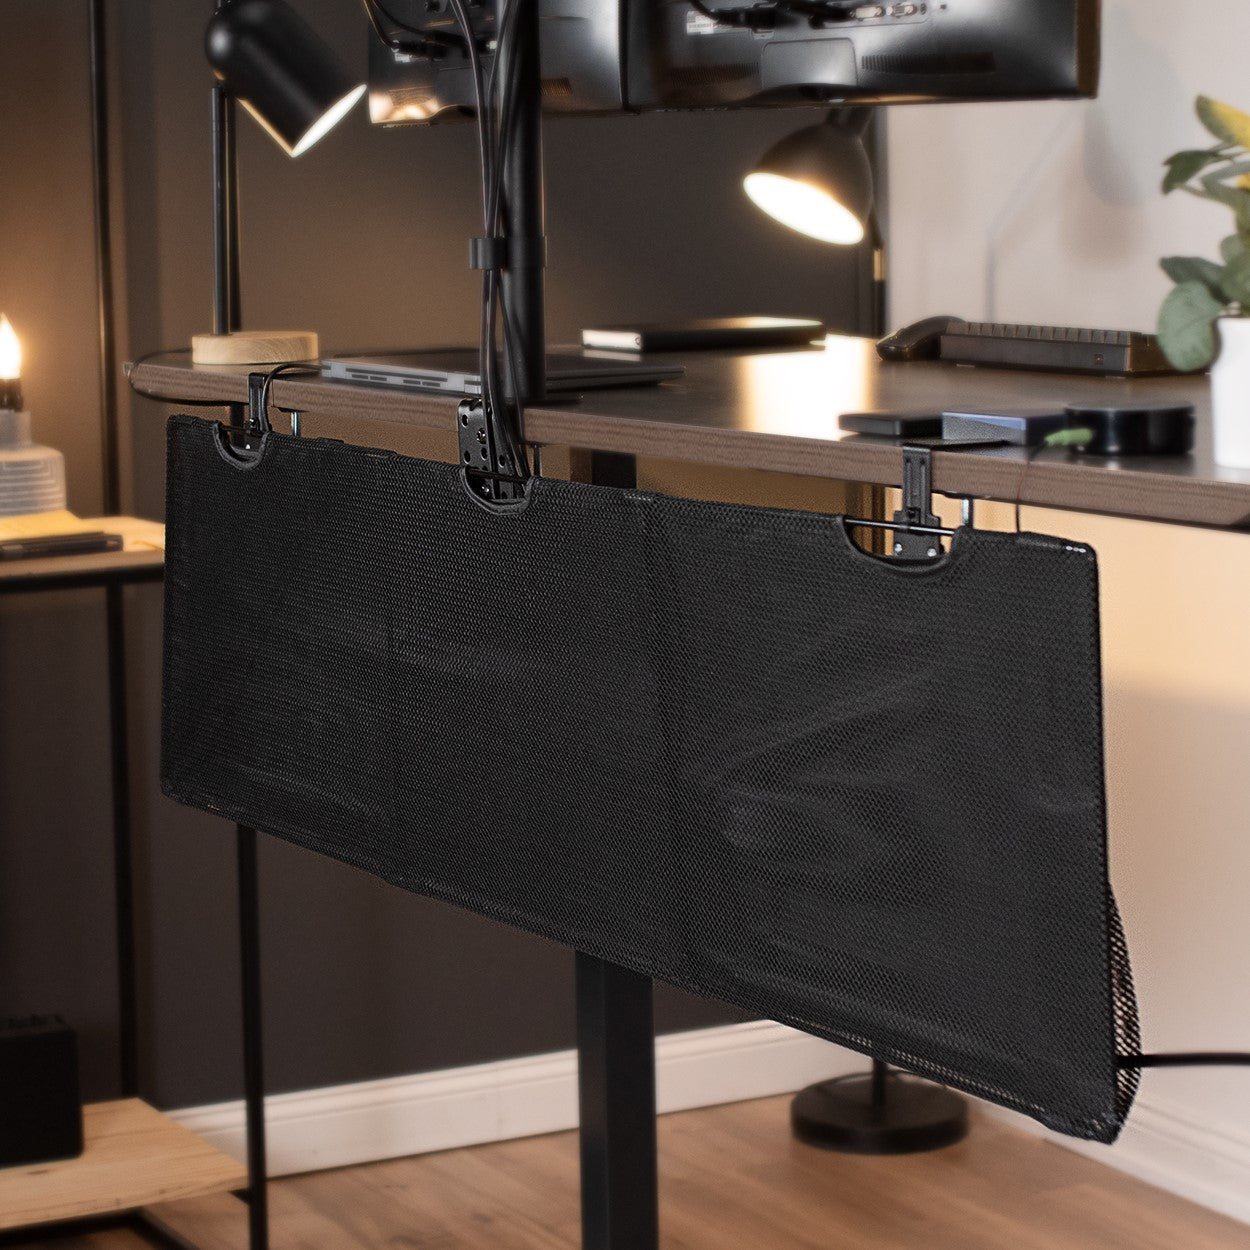 Durable clamp-on desk skirt with pockets for extra storage.